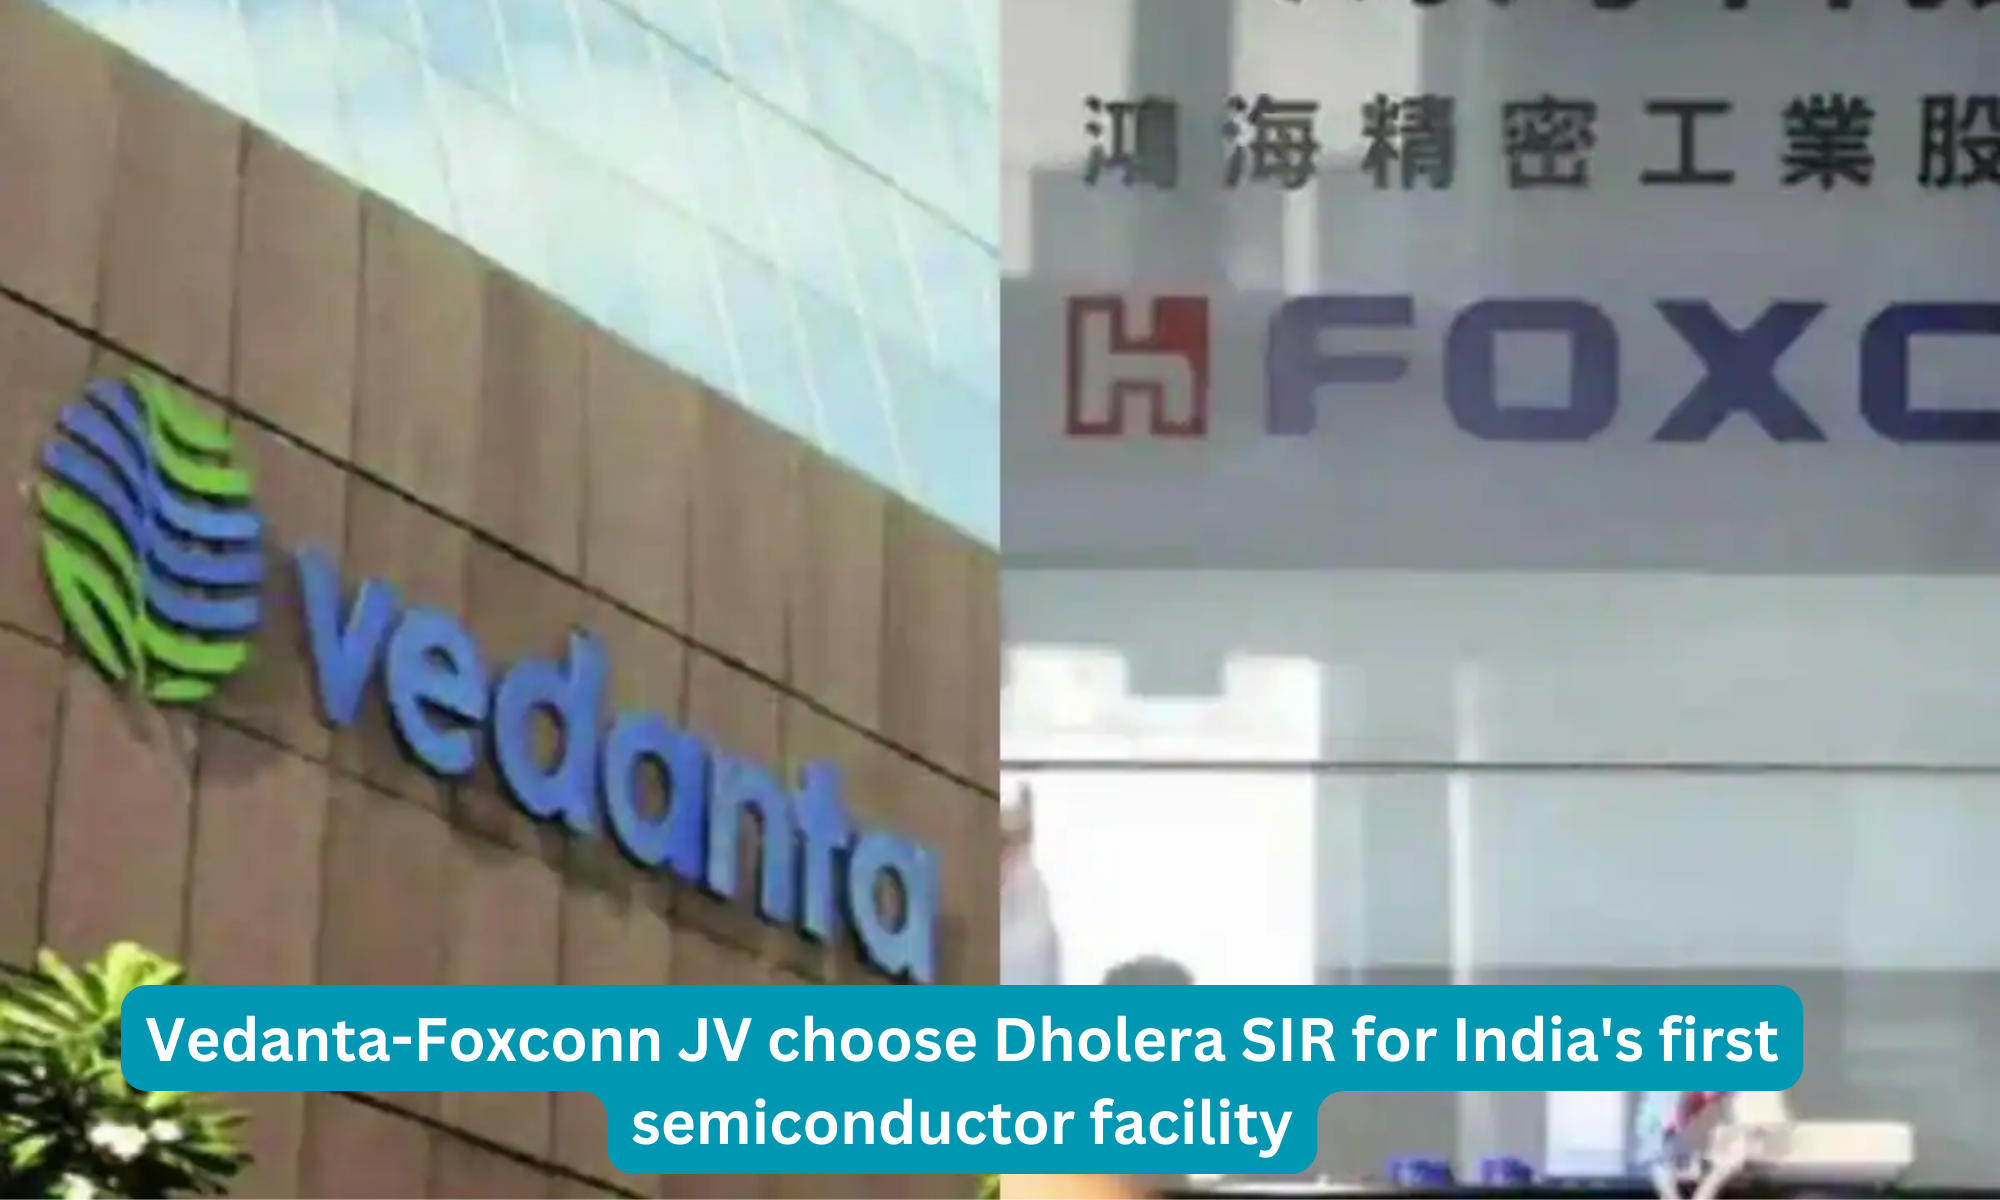 Vedanta-Foxconn JV choose Dholera SIR for India's first semiconductor facility